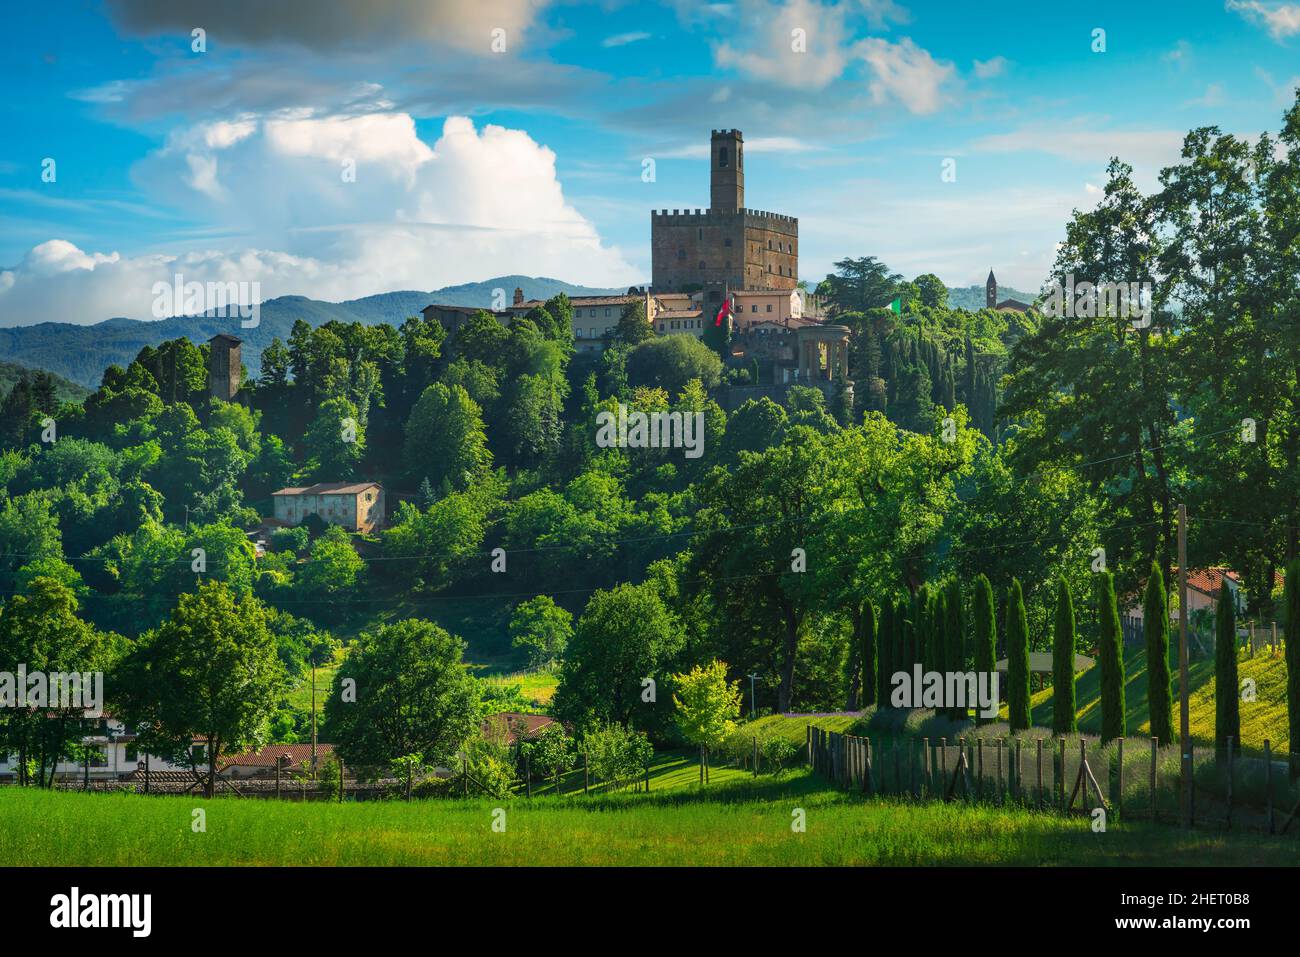 Poppi medieval village and castle view. Casentino, Arezzo province, Tuscany region, Italy, Europe. Stock Photo